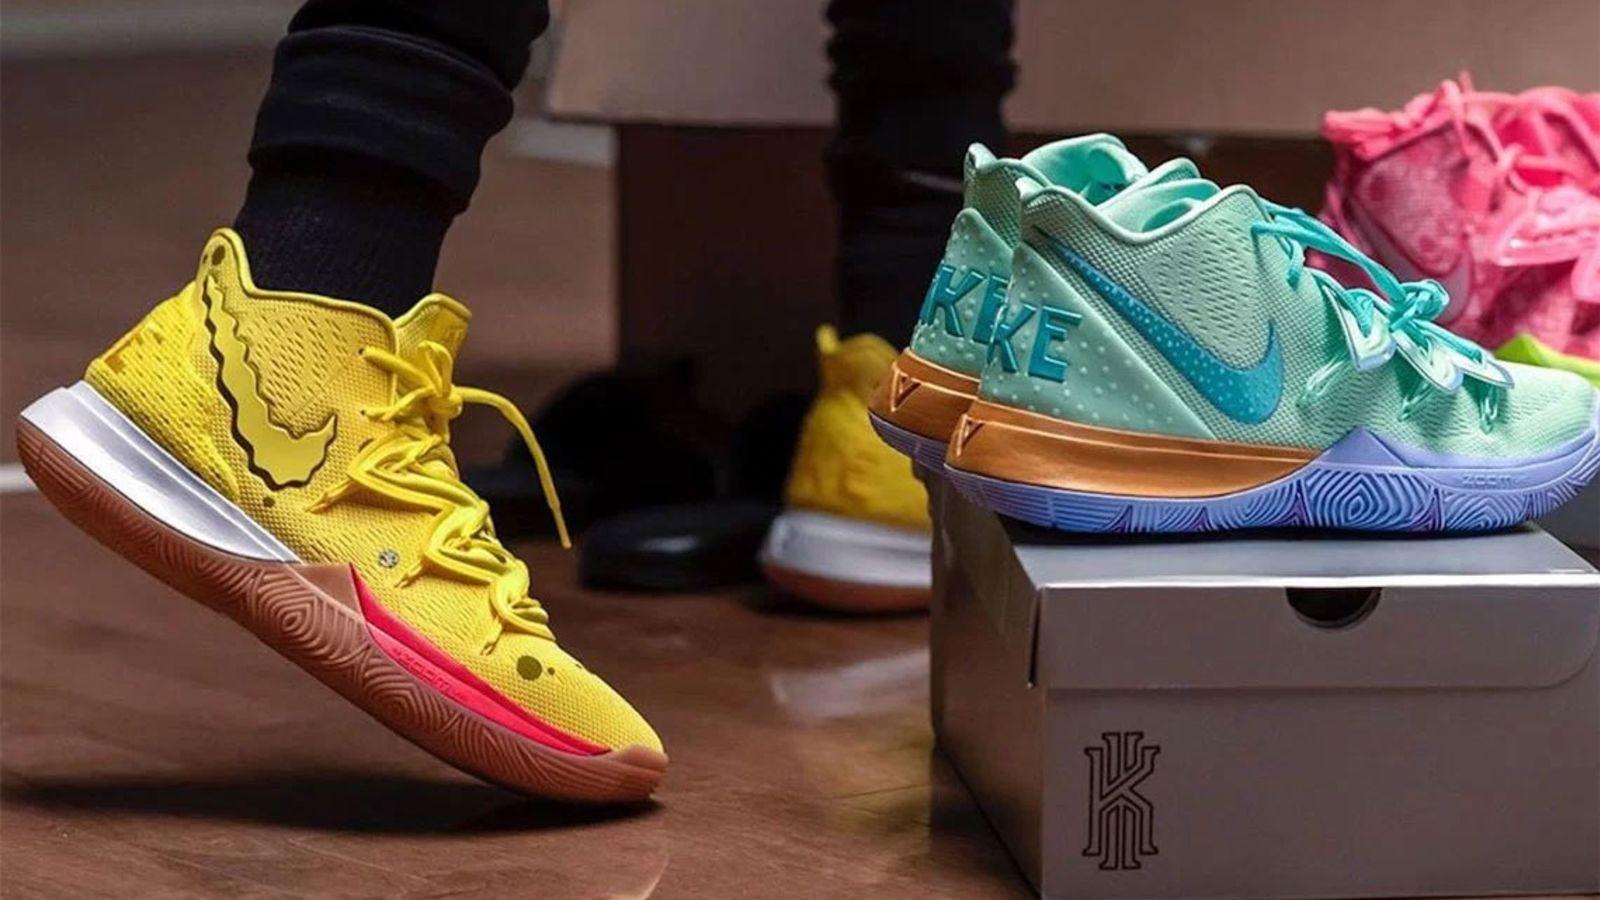 Kyrie Irving x SpongeBob SquarePants Nike Sneakers are OUT NOW